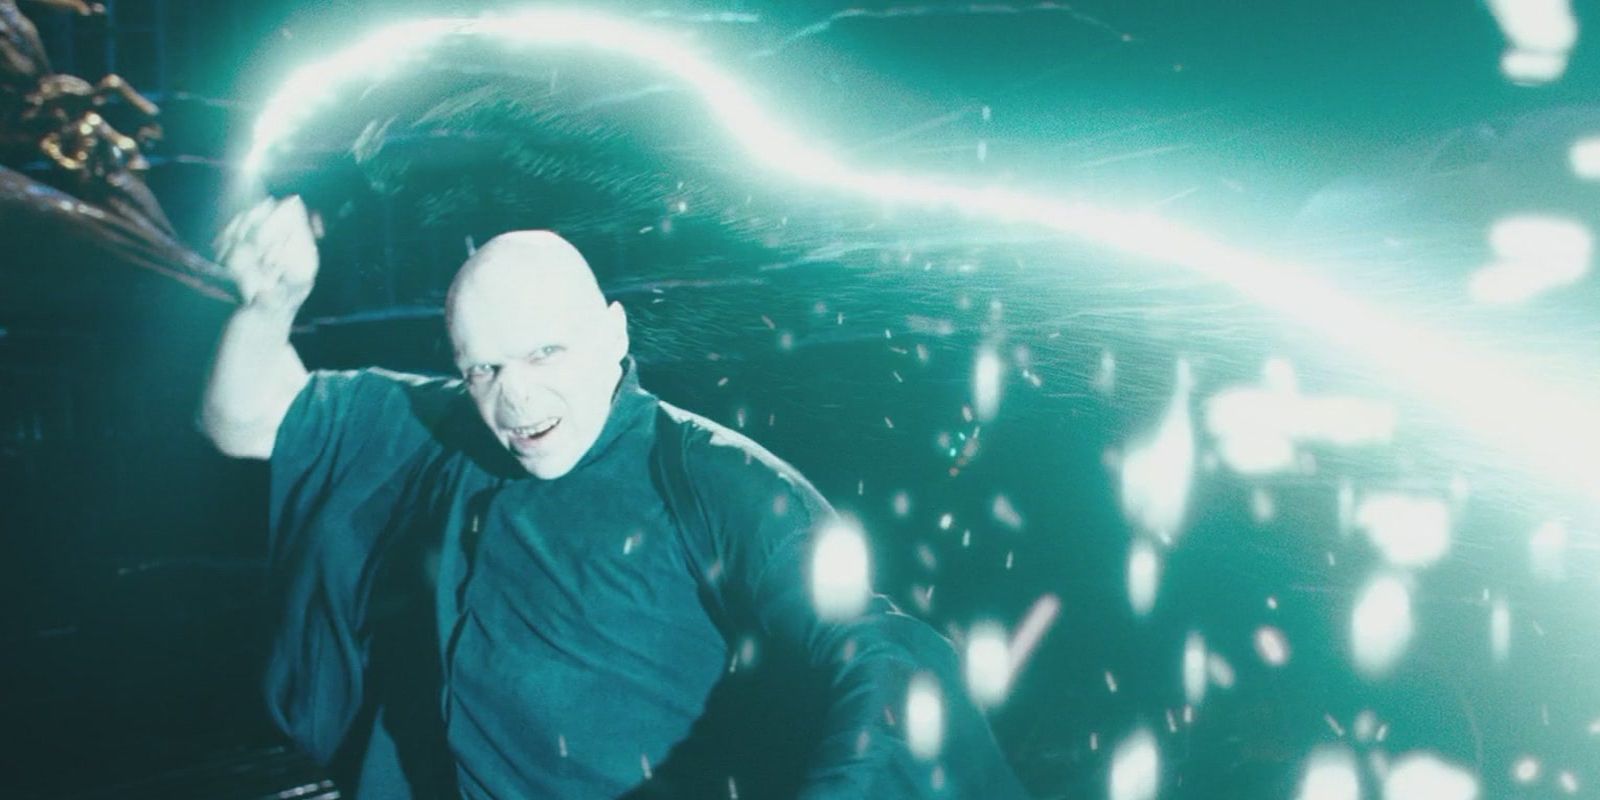 Voldemort casting the Killing Curse in a Harry Potter movie.